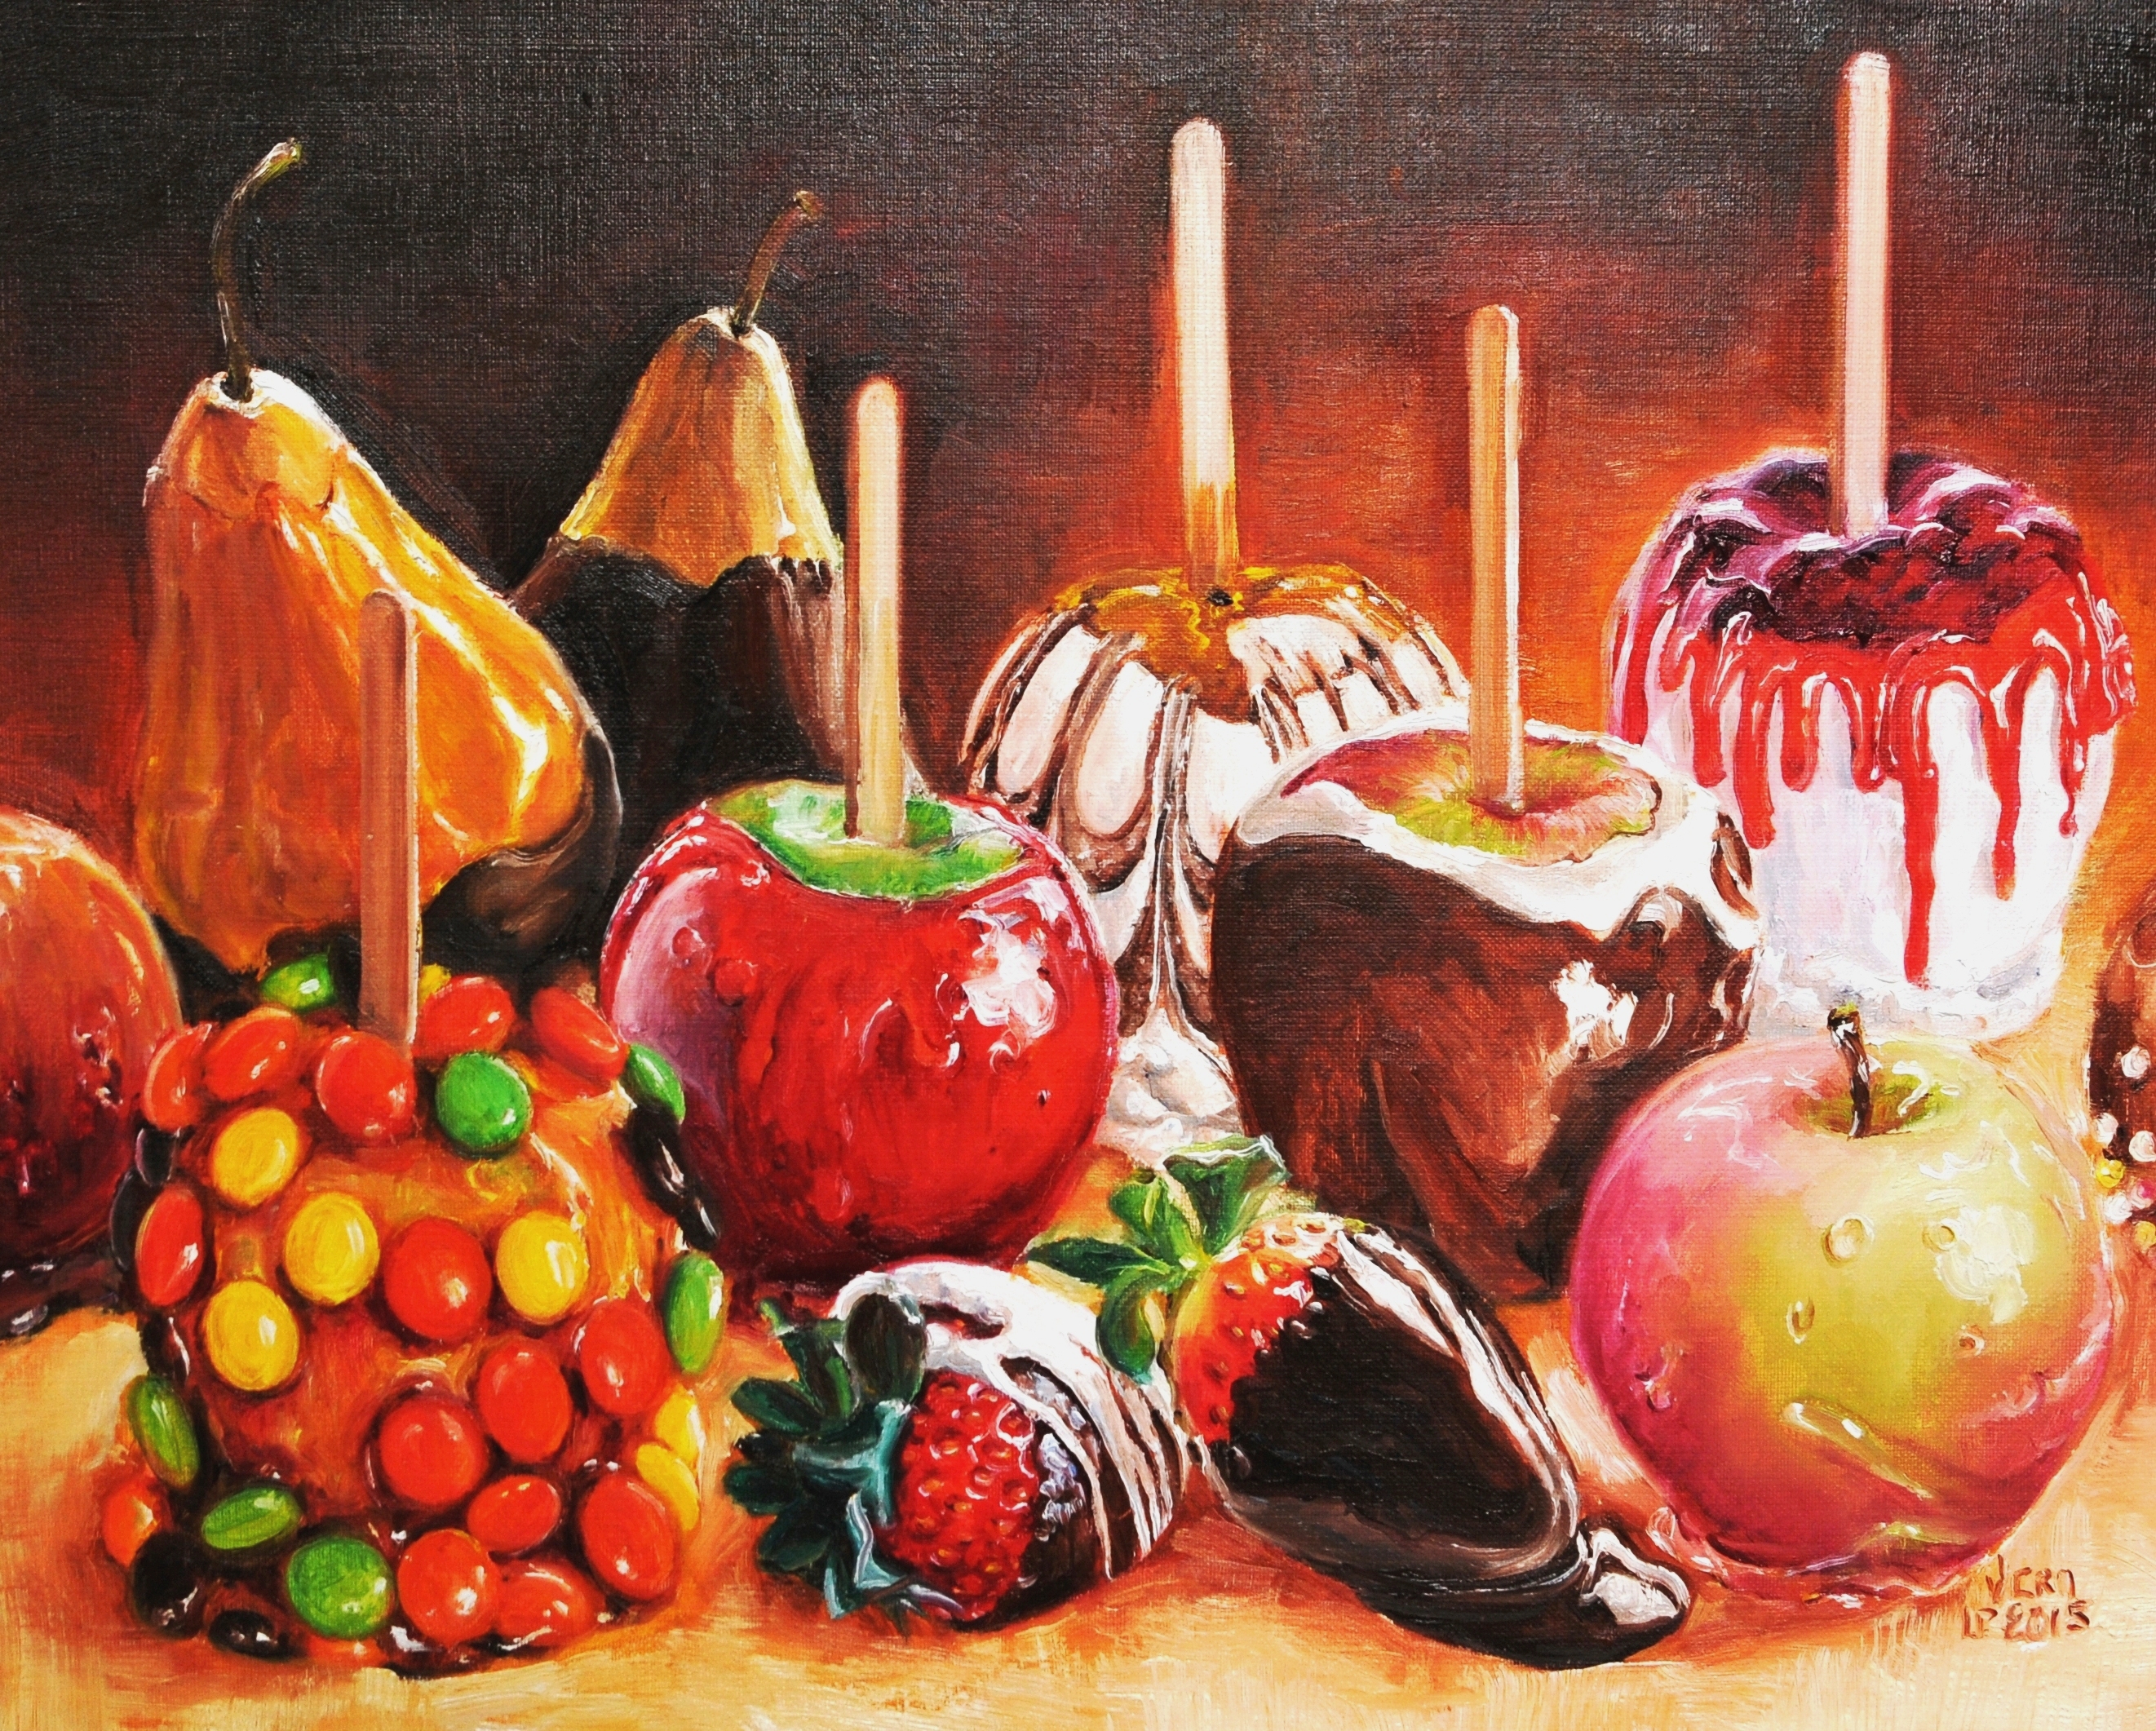 Candy apples | Oil paint on linen | Year: 2015 | Dimensions: 40x50cm